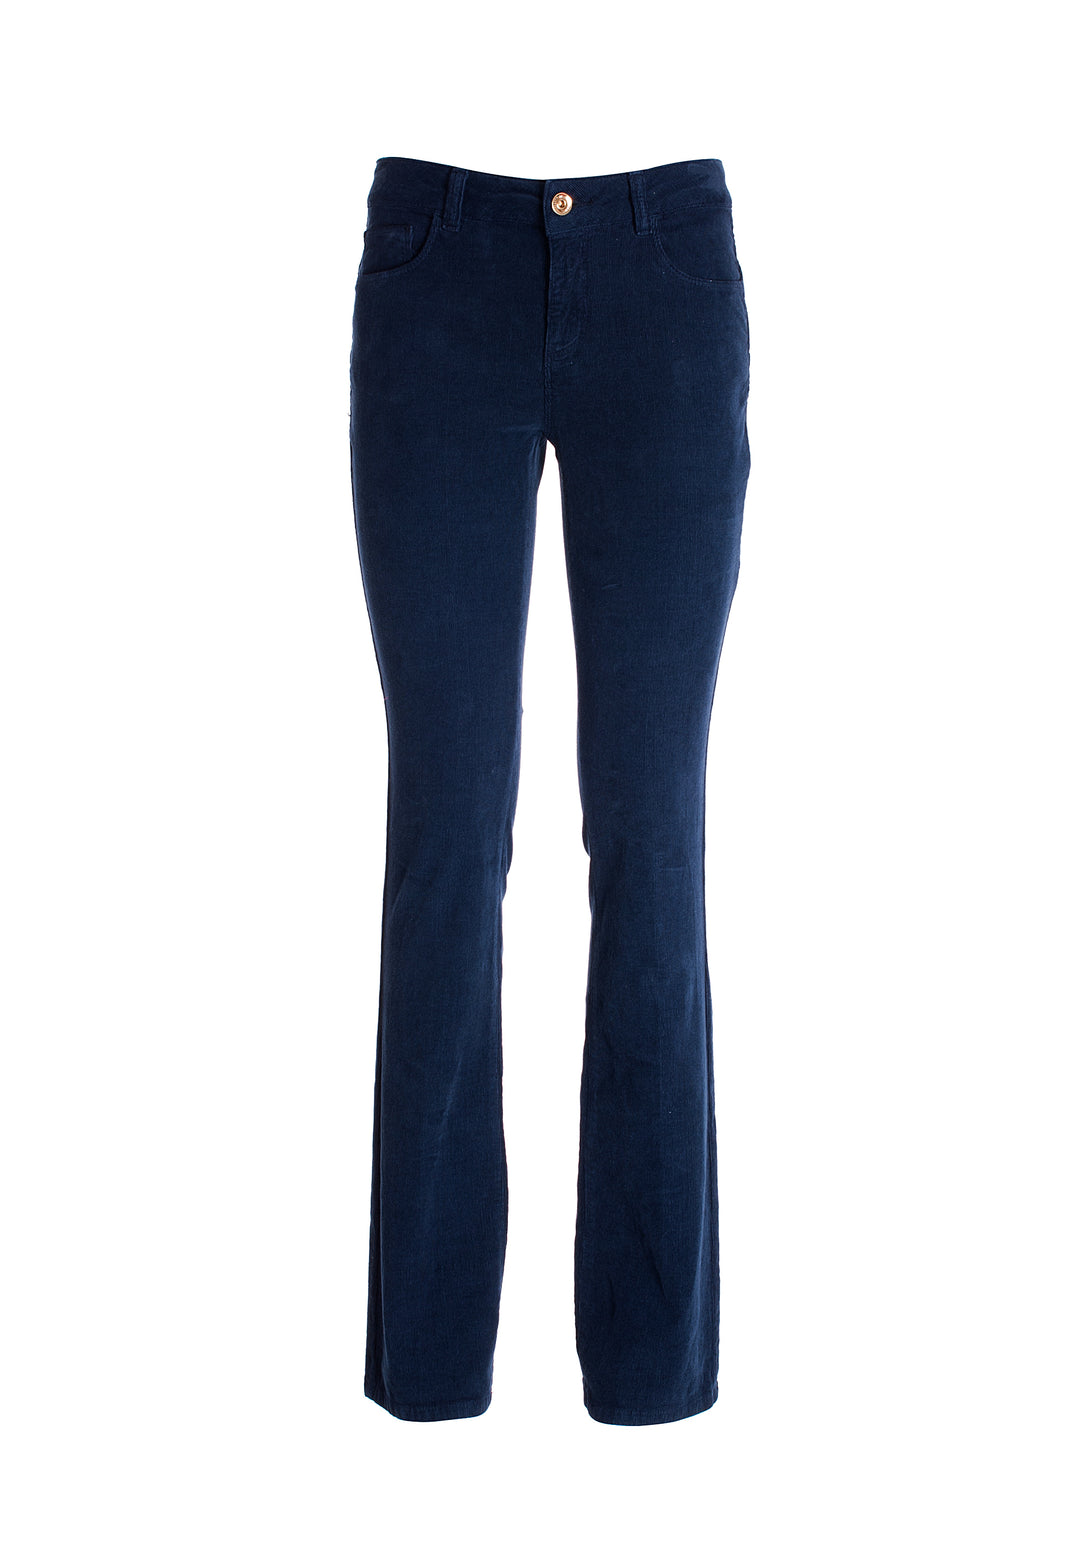 Bootcut pant with push-up effect made in needlecord velvet